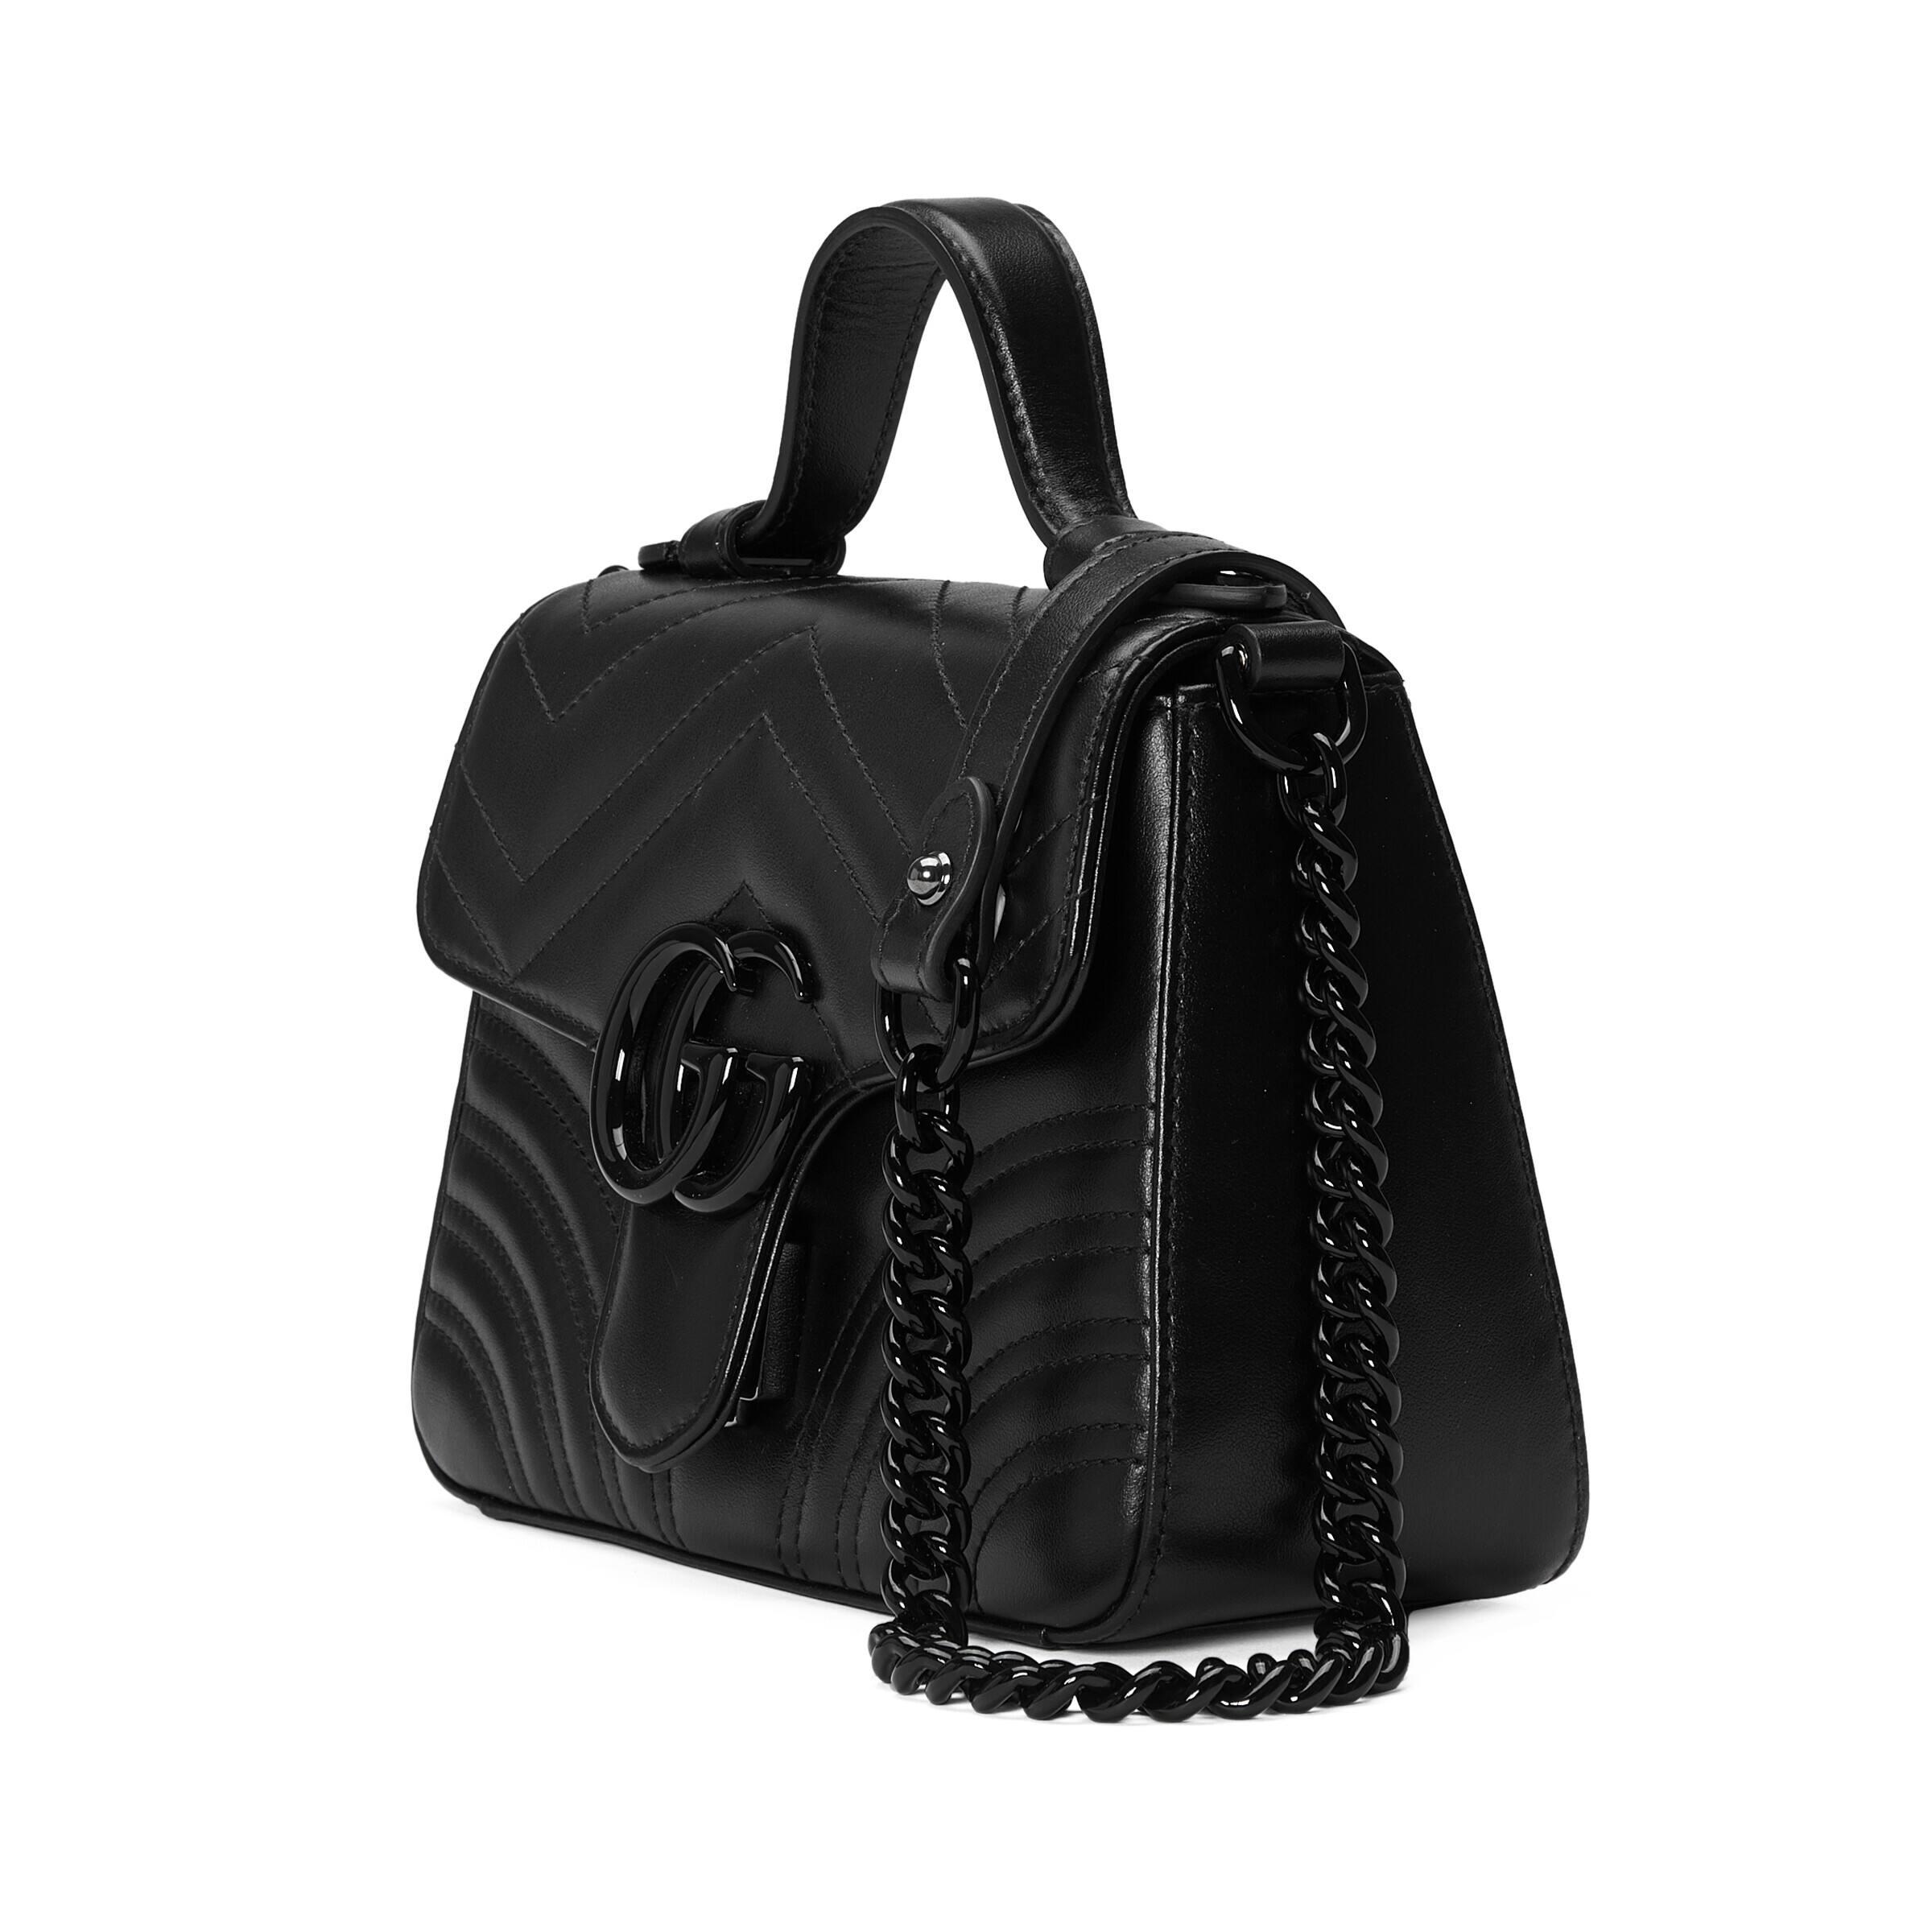 Gucci GG Marmont Mini Top Handle Bag in Black | Lyst